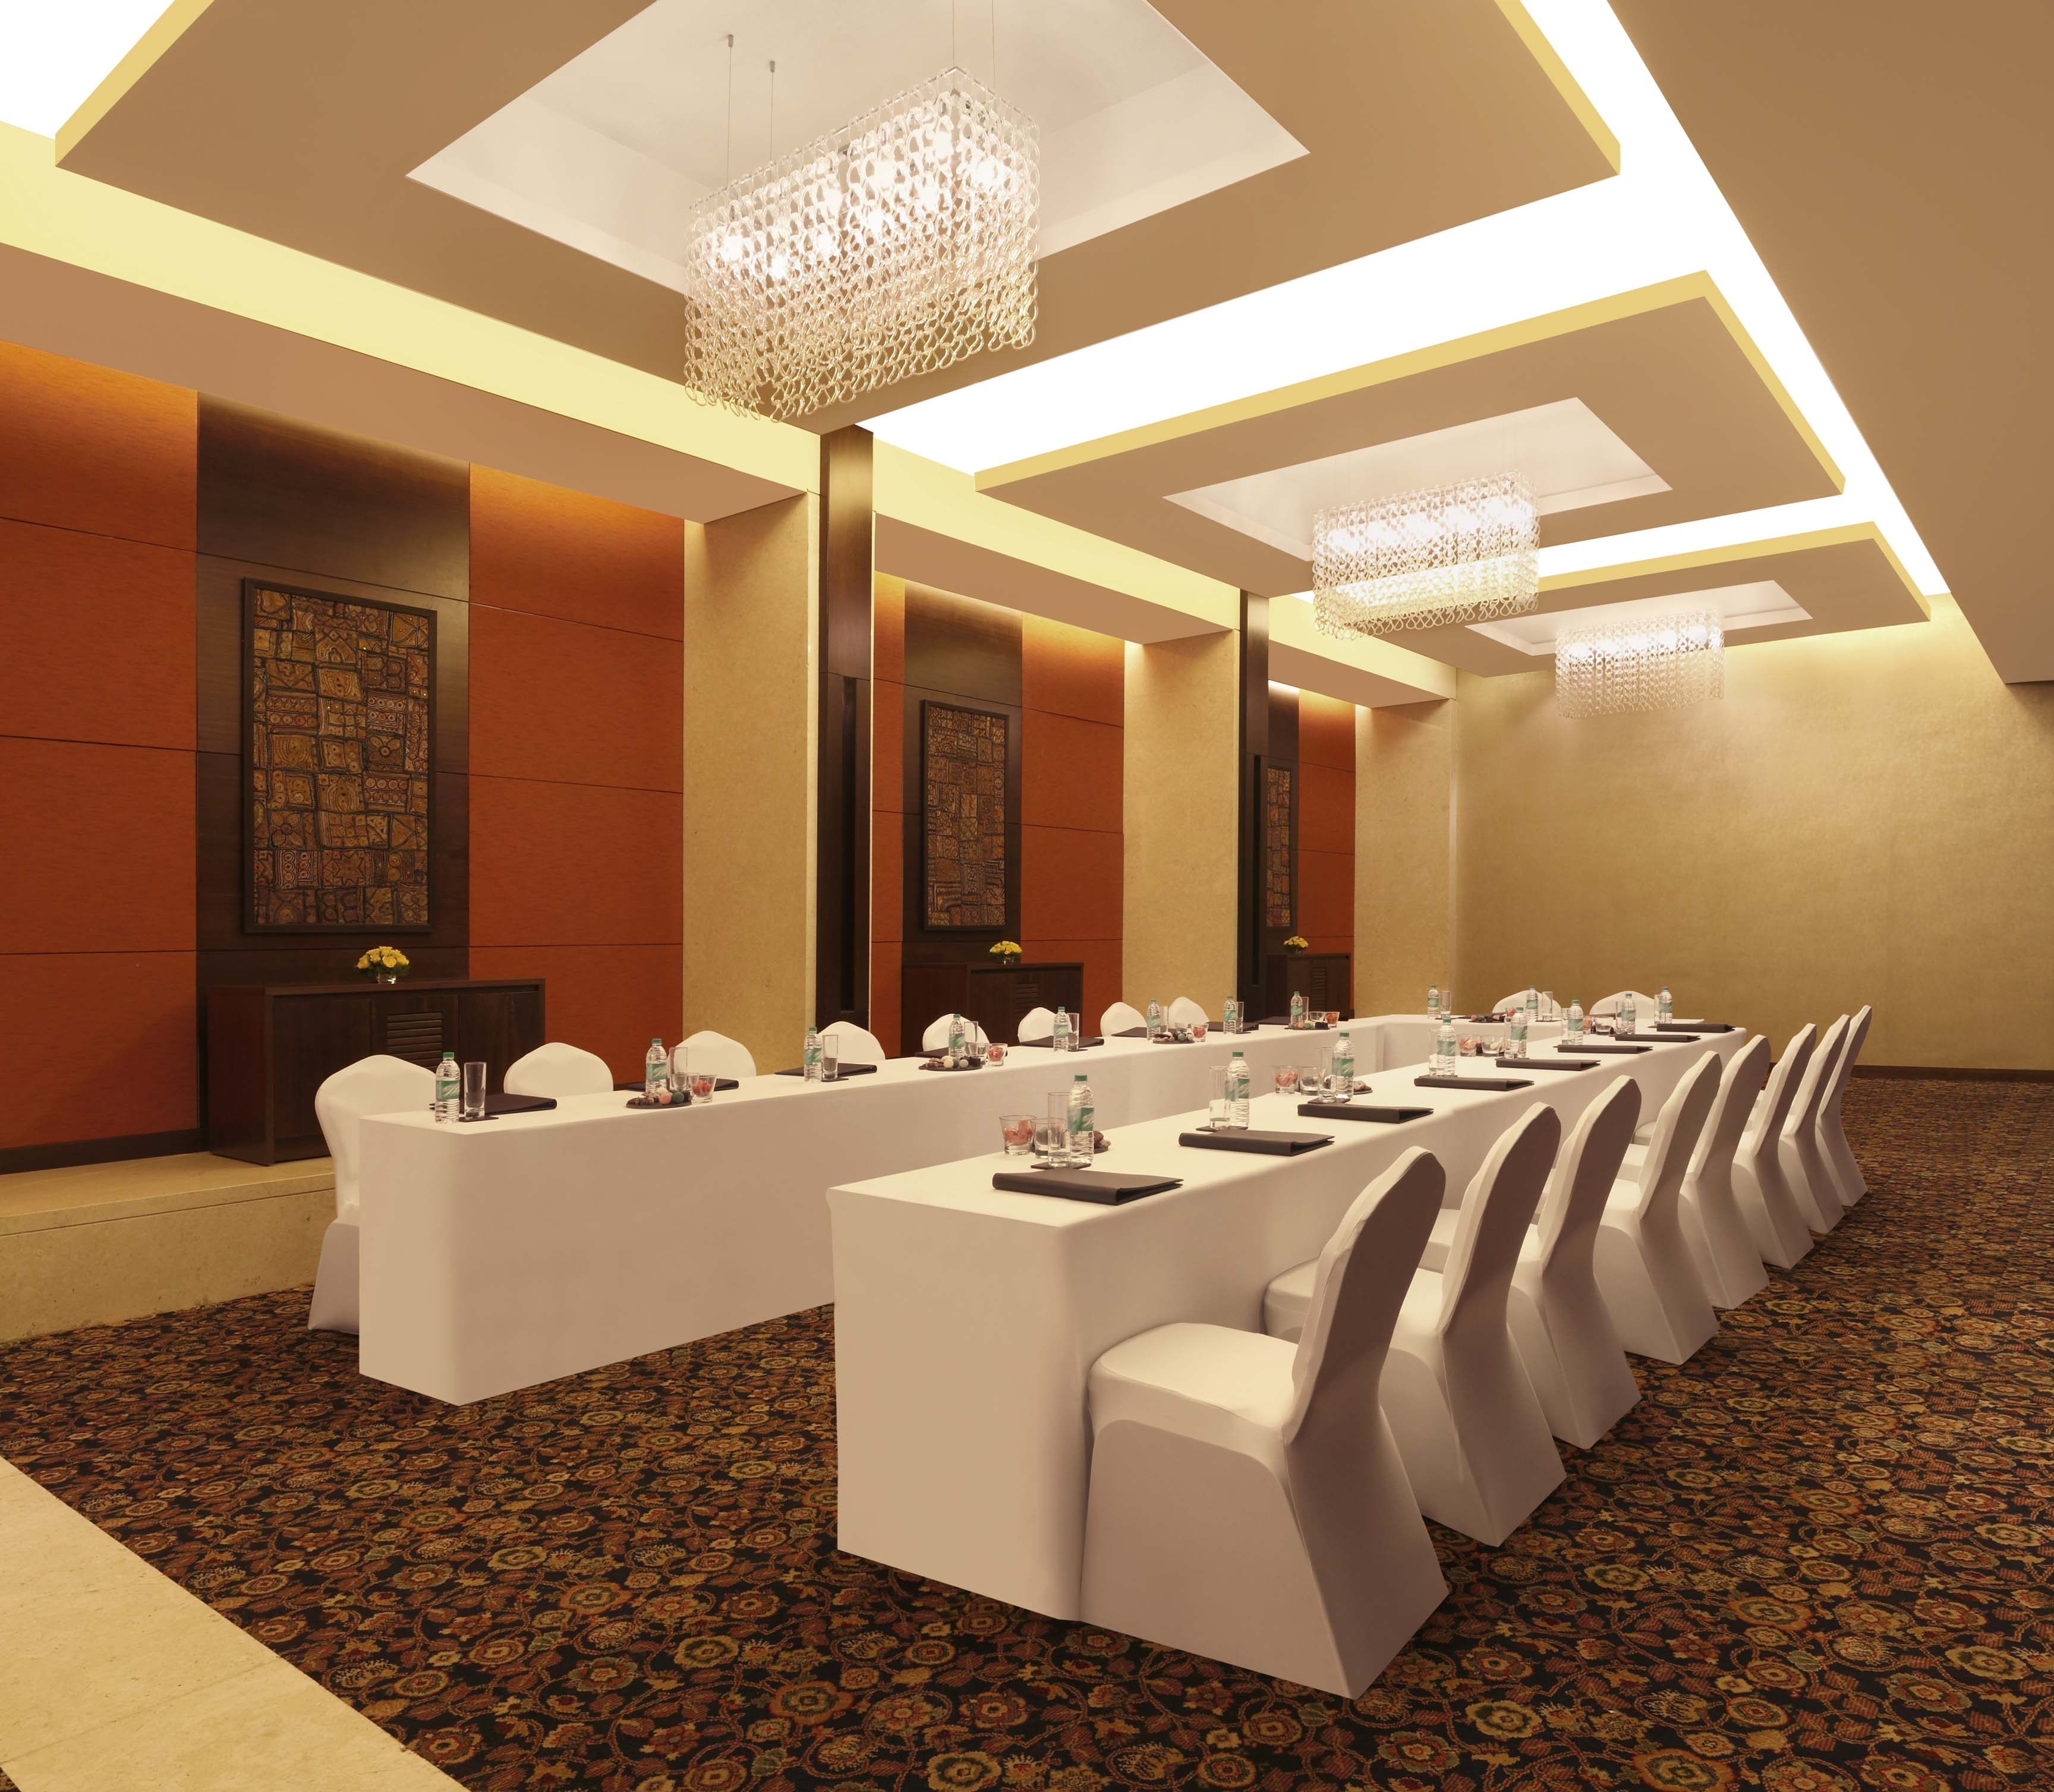 Vihara Banquet Hall With Wall Art, U-Shaped Table With Water Bottles, Notepads,  White Linens, and White Chairs